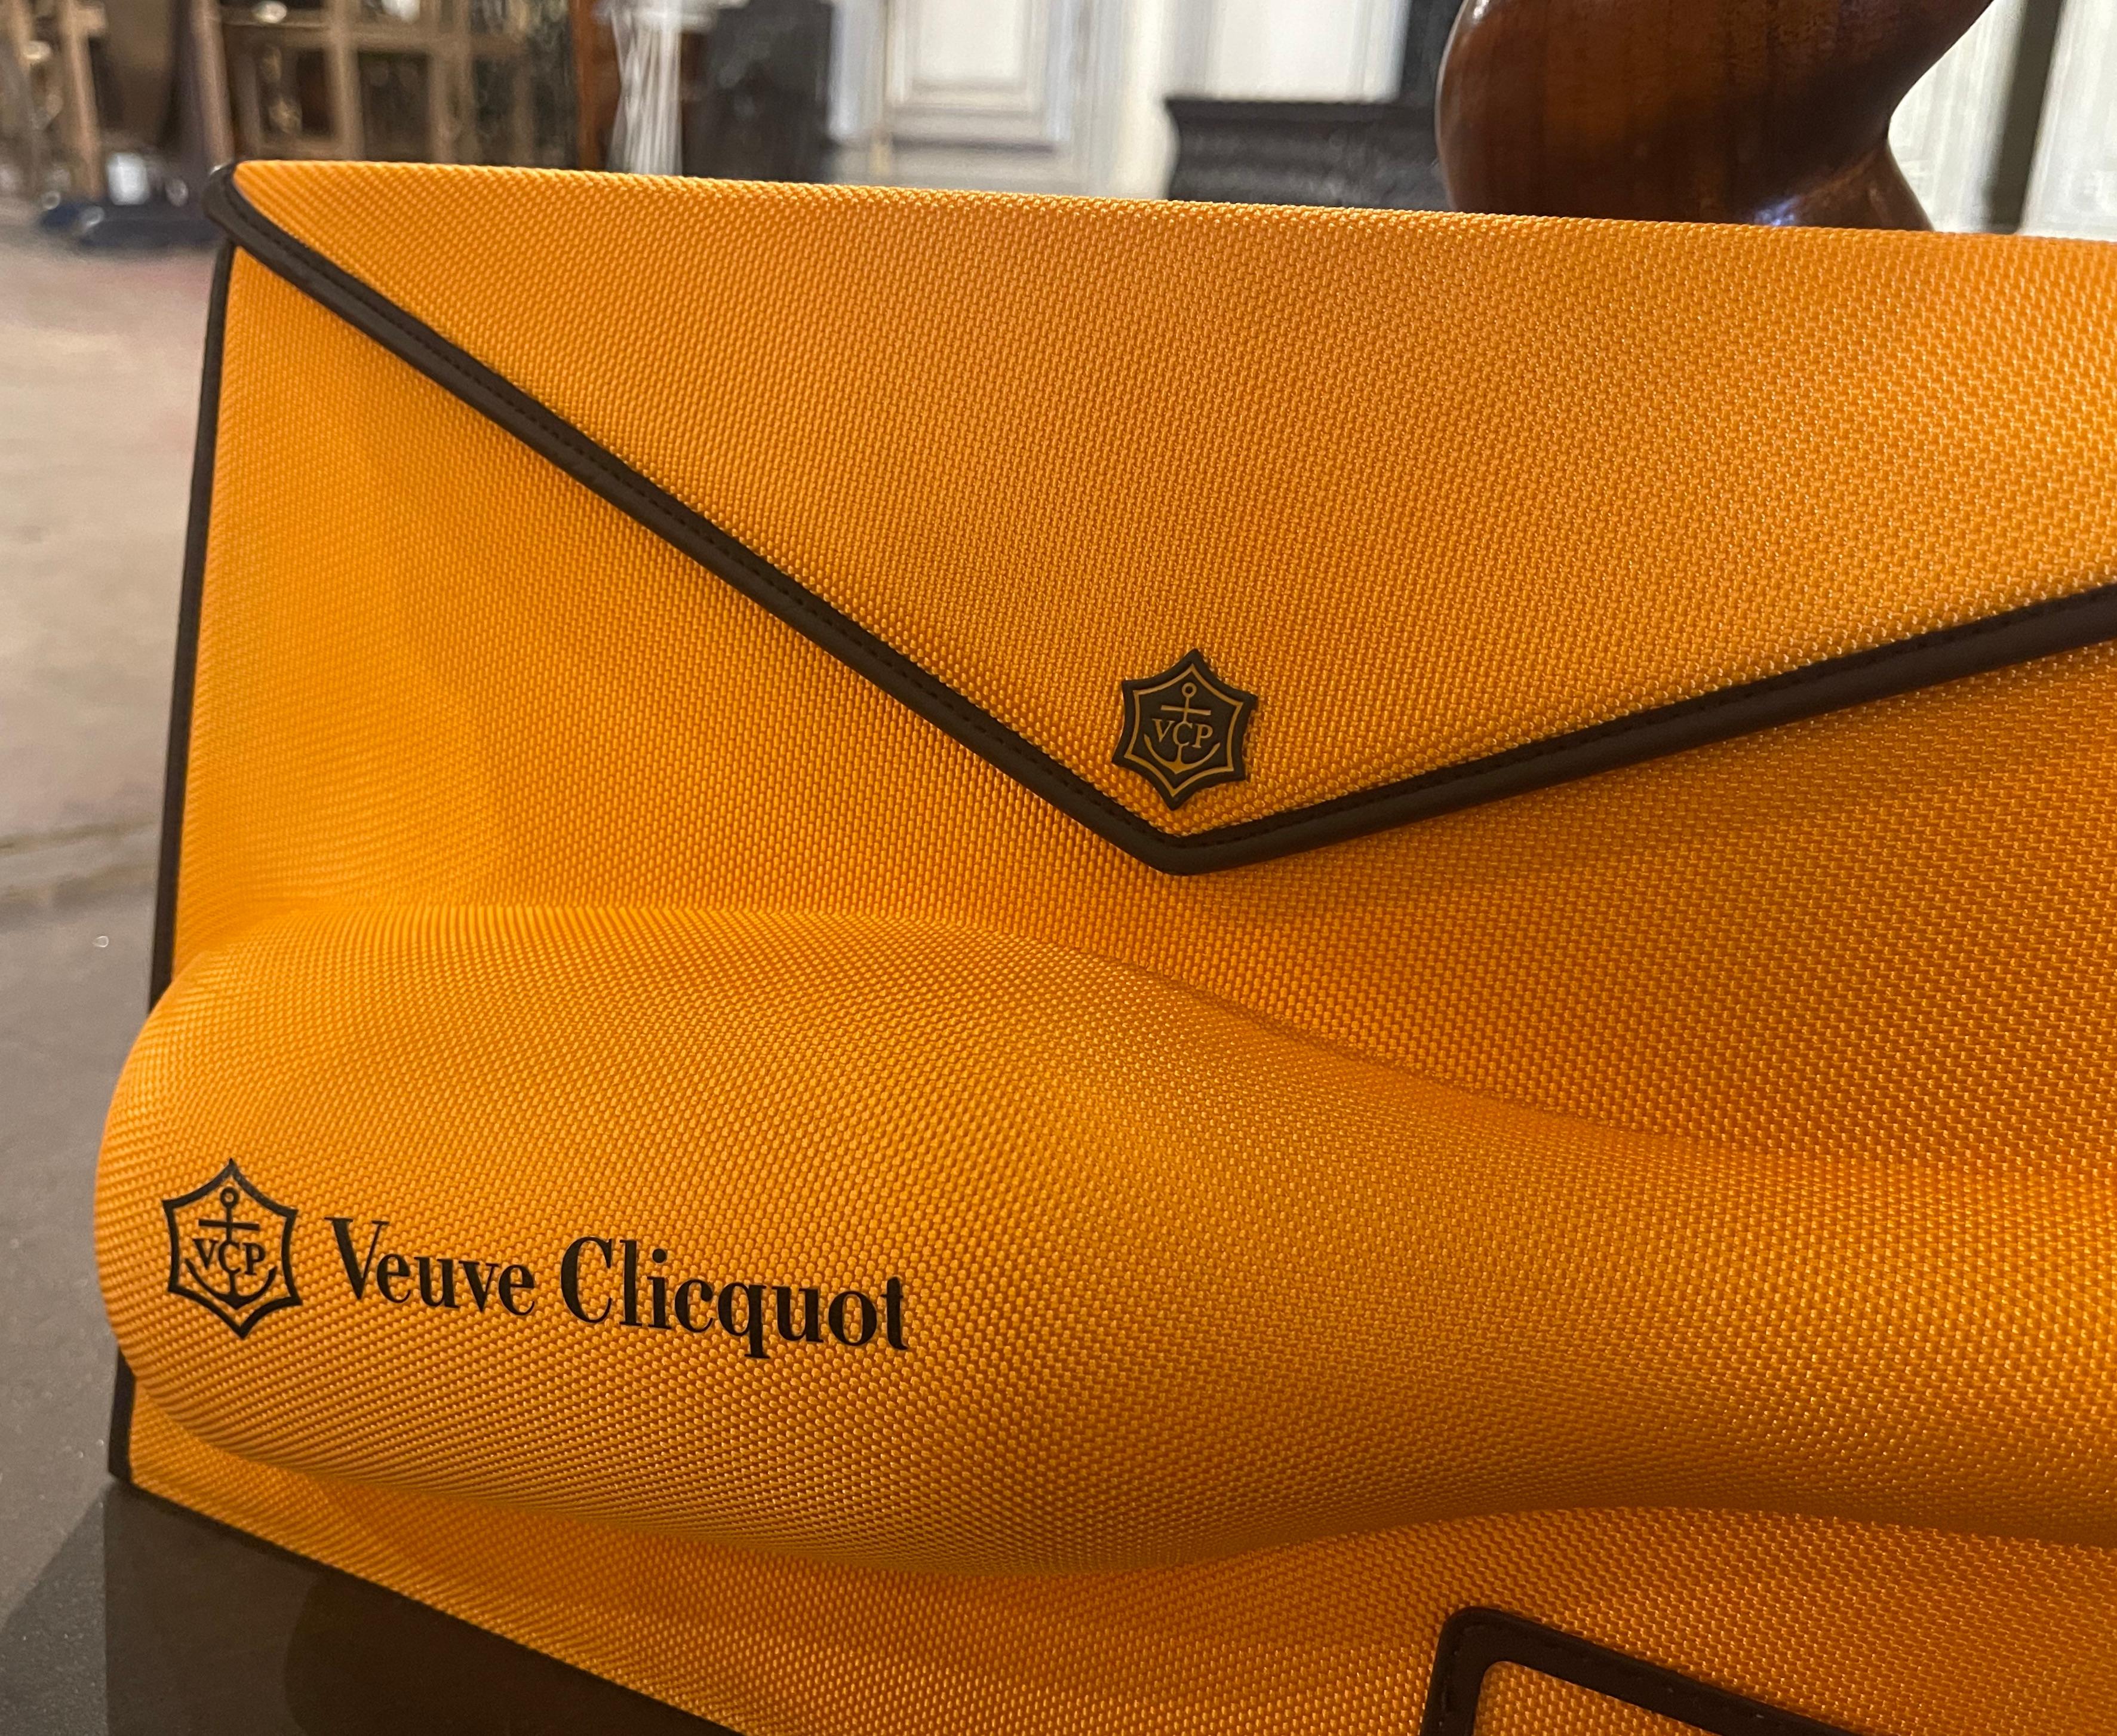 Introducing the captivating Clicquot Clutch an exquisite reinterpretation of the classic envelope purse. This resplendent yellow carrier was crafted in France circa 2010, and is adorned with elegant brown leather piping, which exudes sophistication.